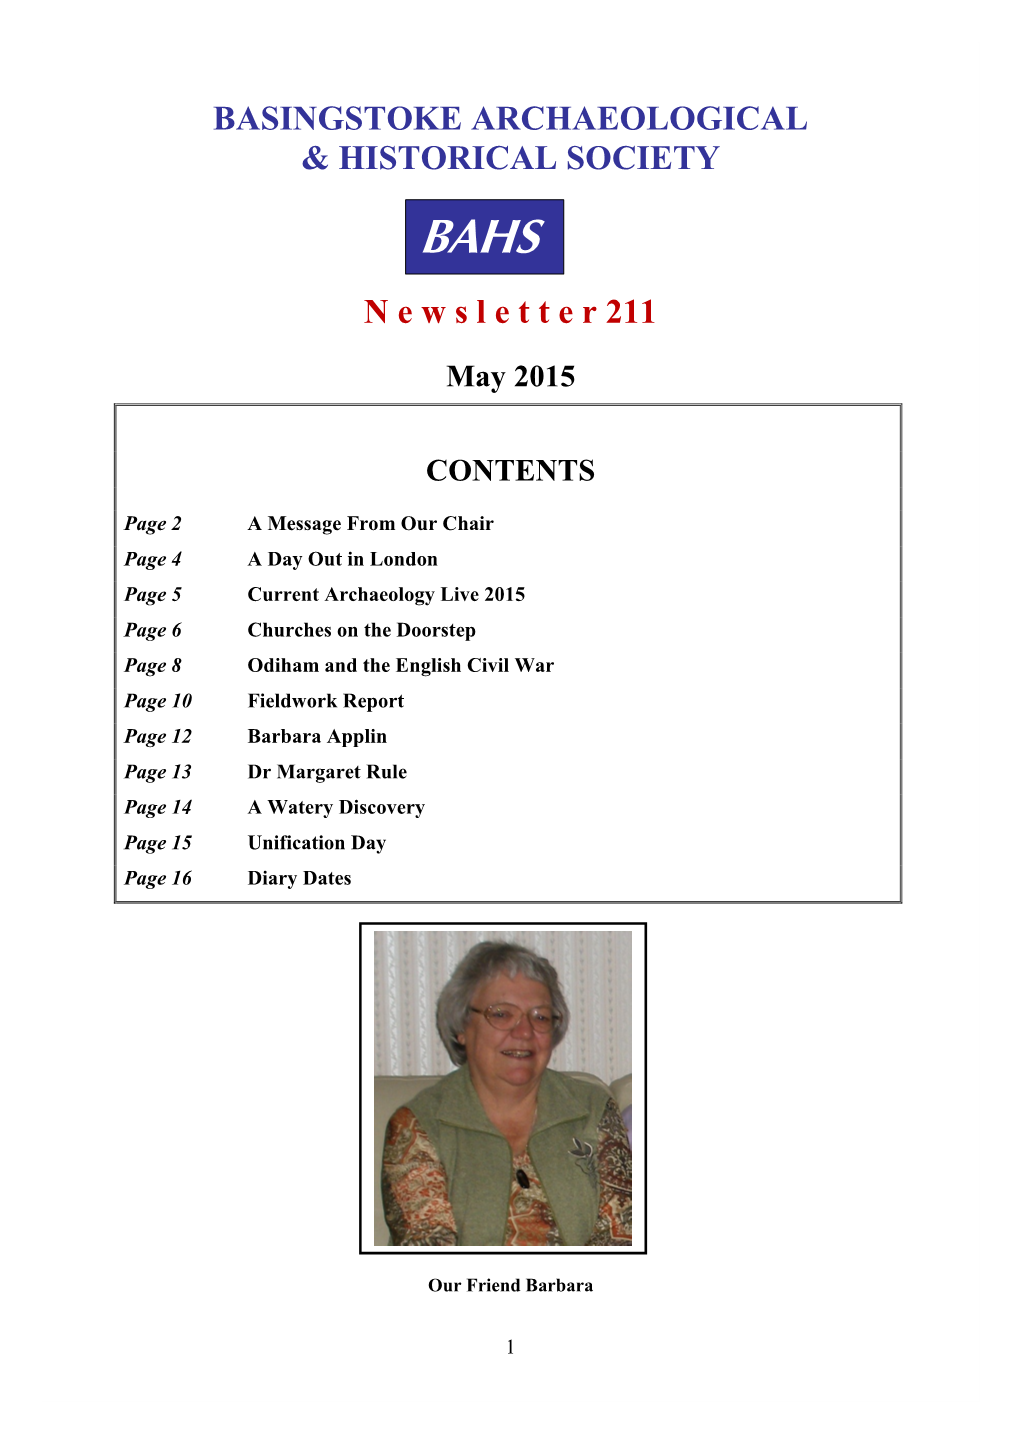 Newsletter and in There You Can Read About Barbara’S Long and Dedicated Commitment to Our Society